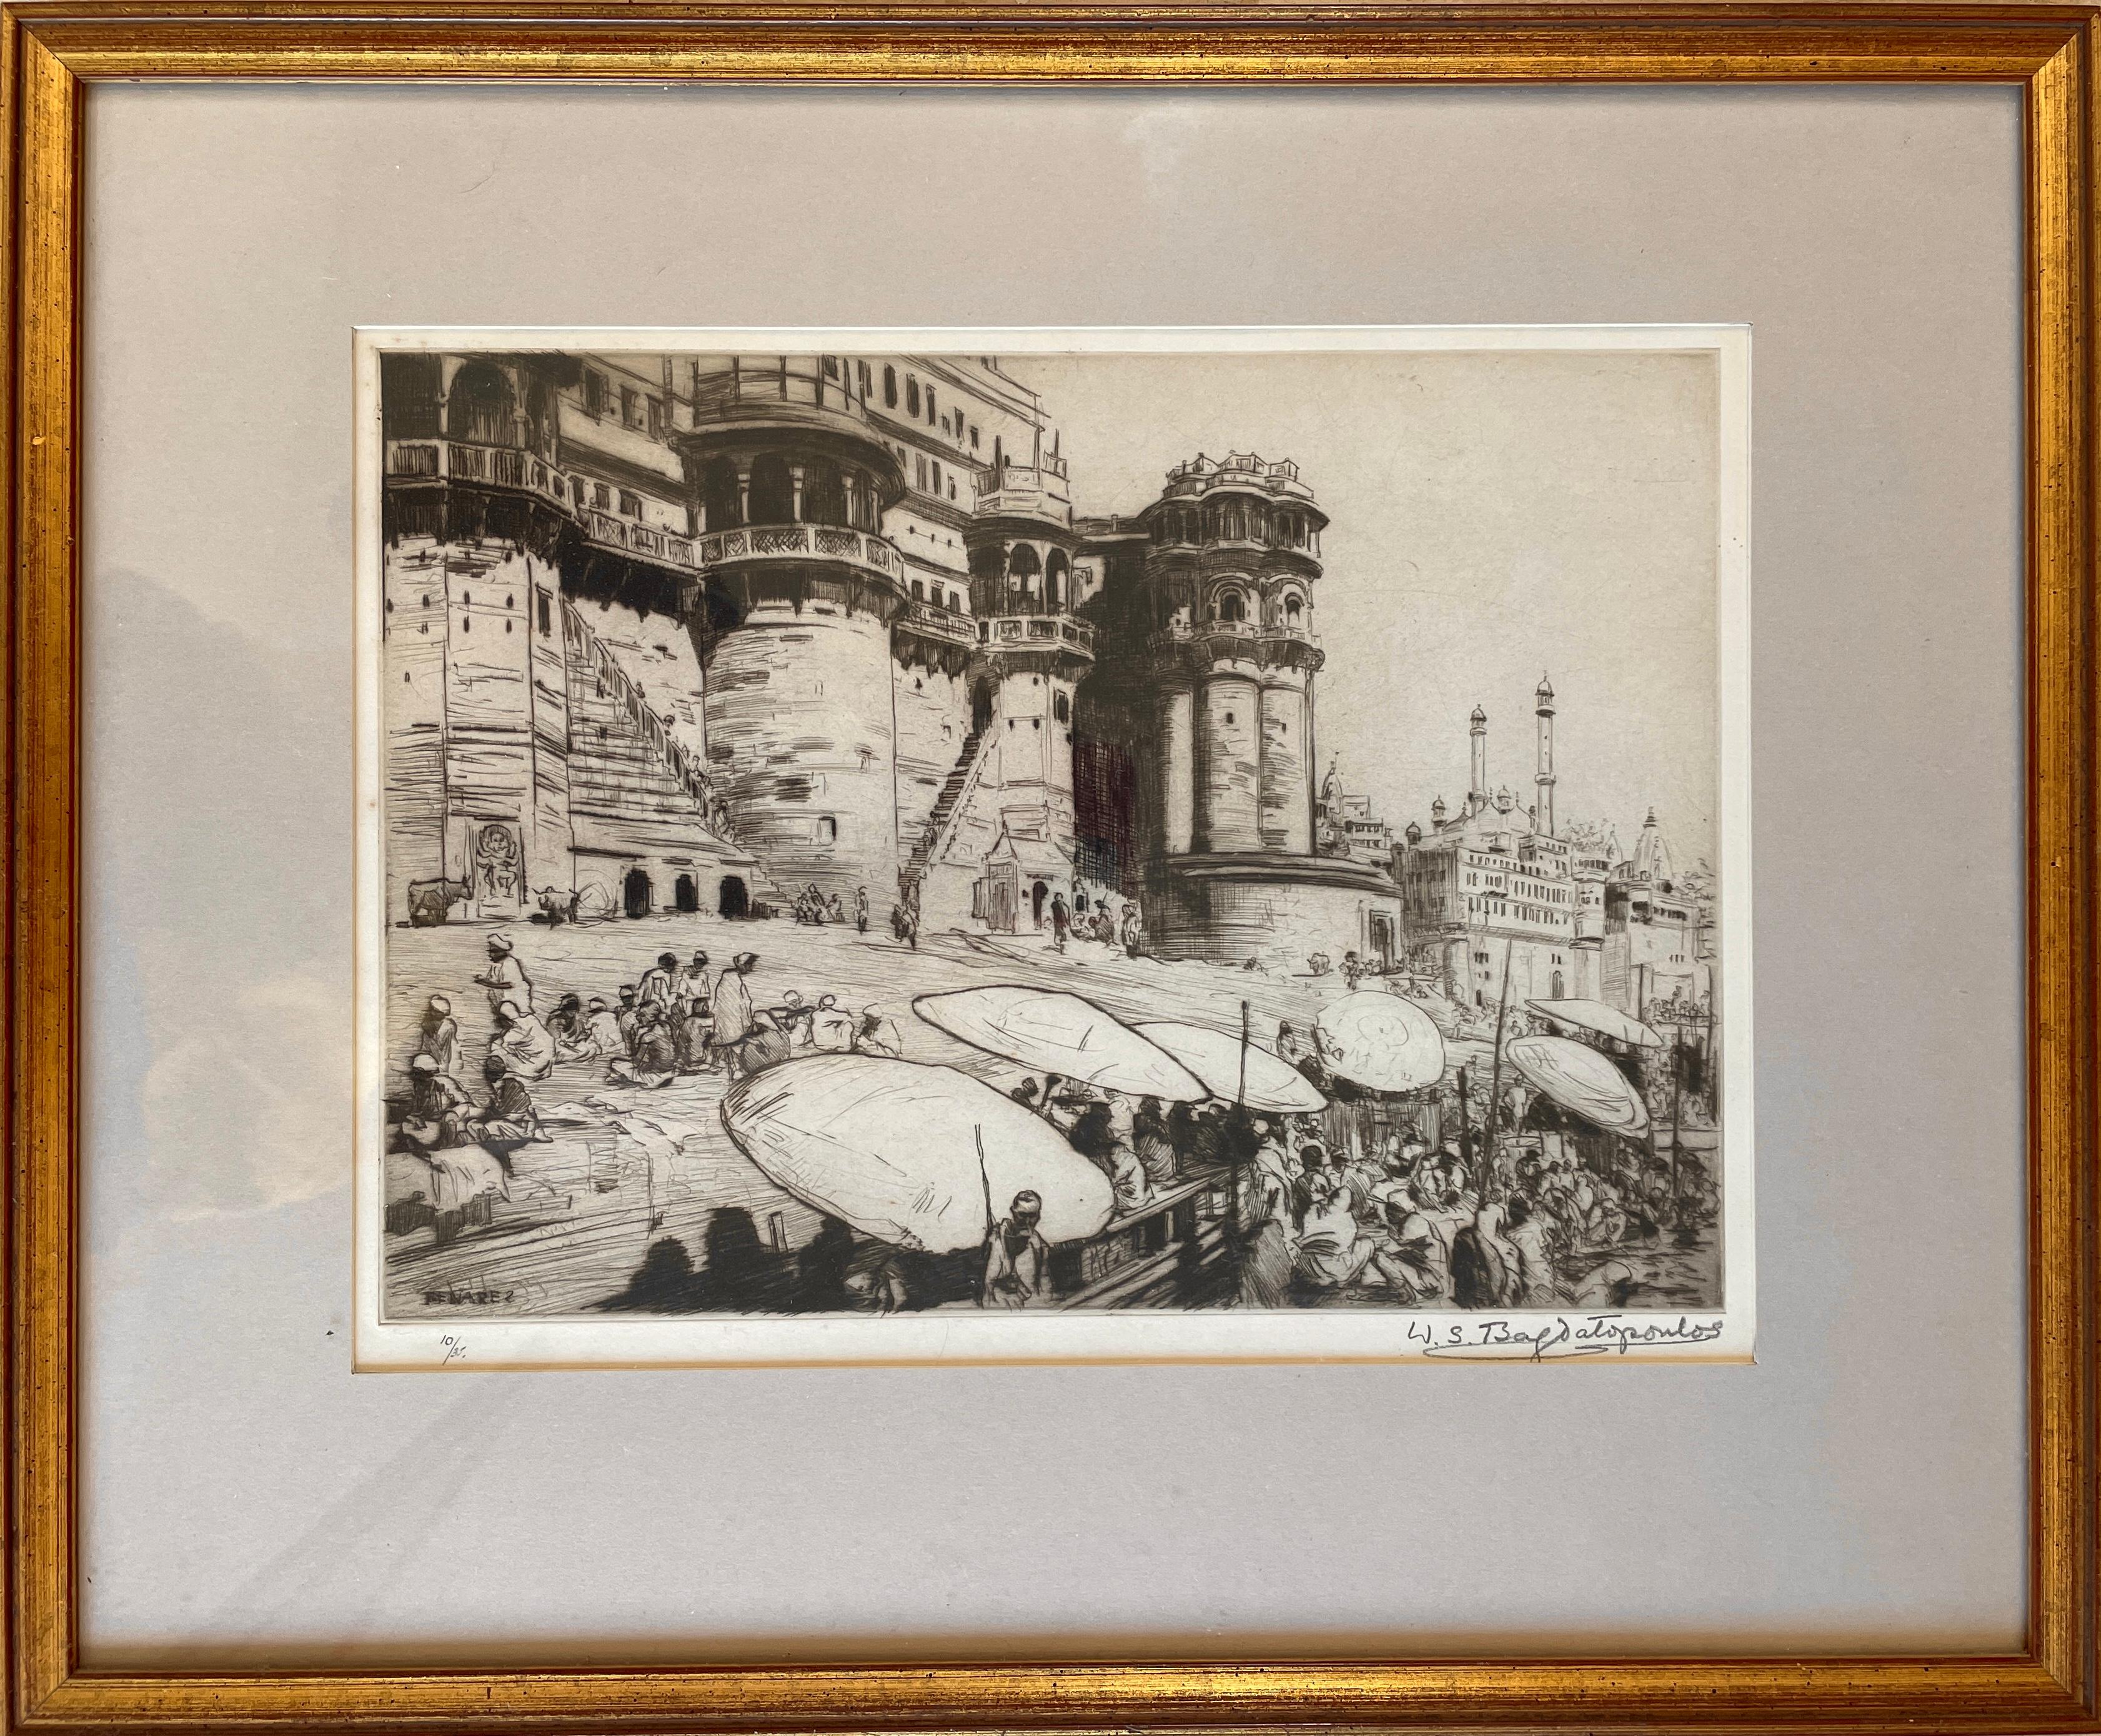 Early 20th century Ltd Etching Indian Listed Art Benares Varanasi Ganges India  - Print by William Spencer Bagdatopoulos